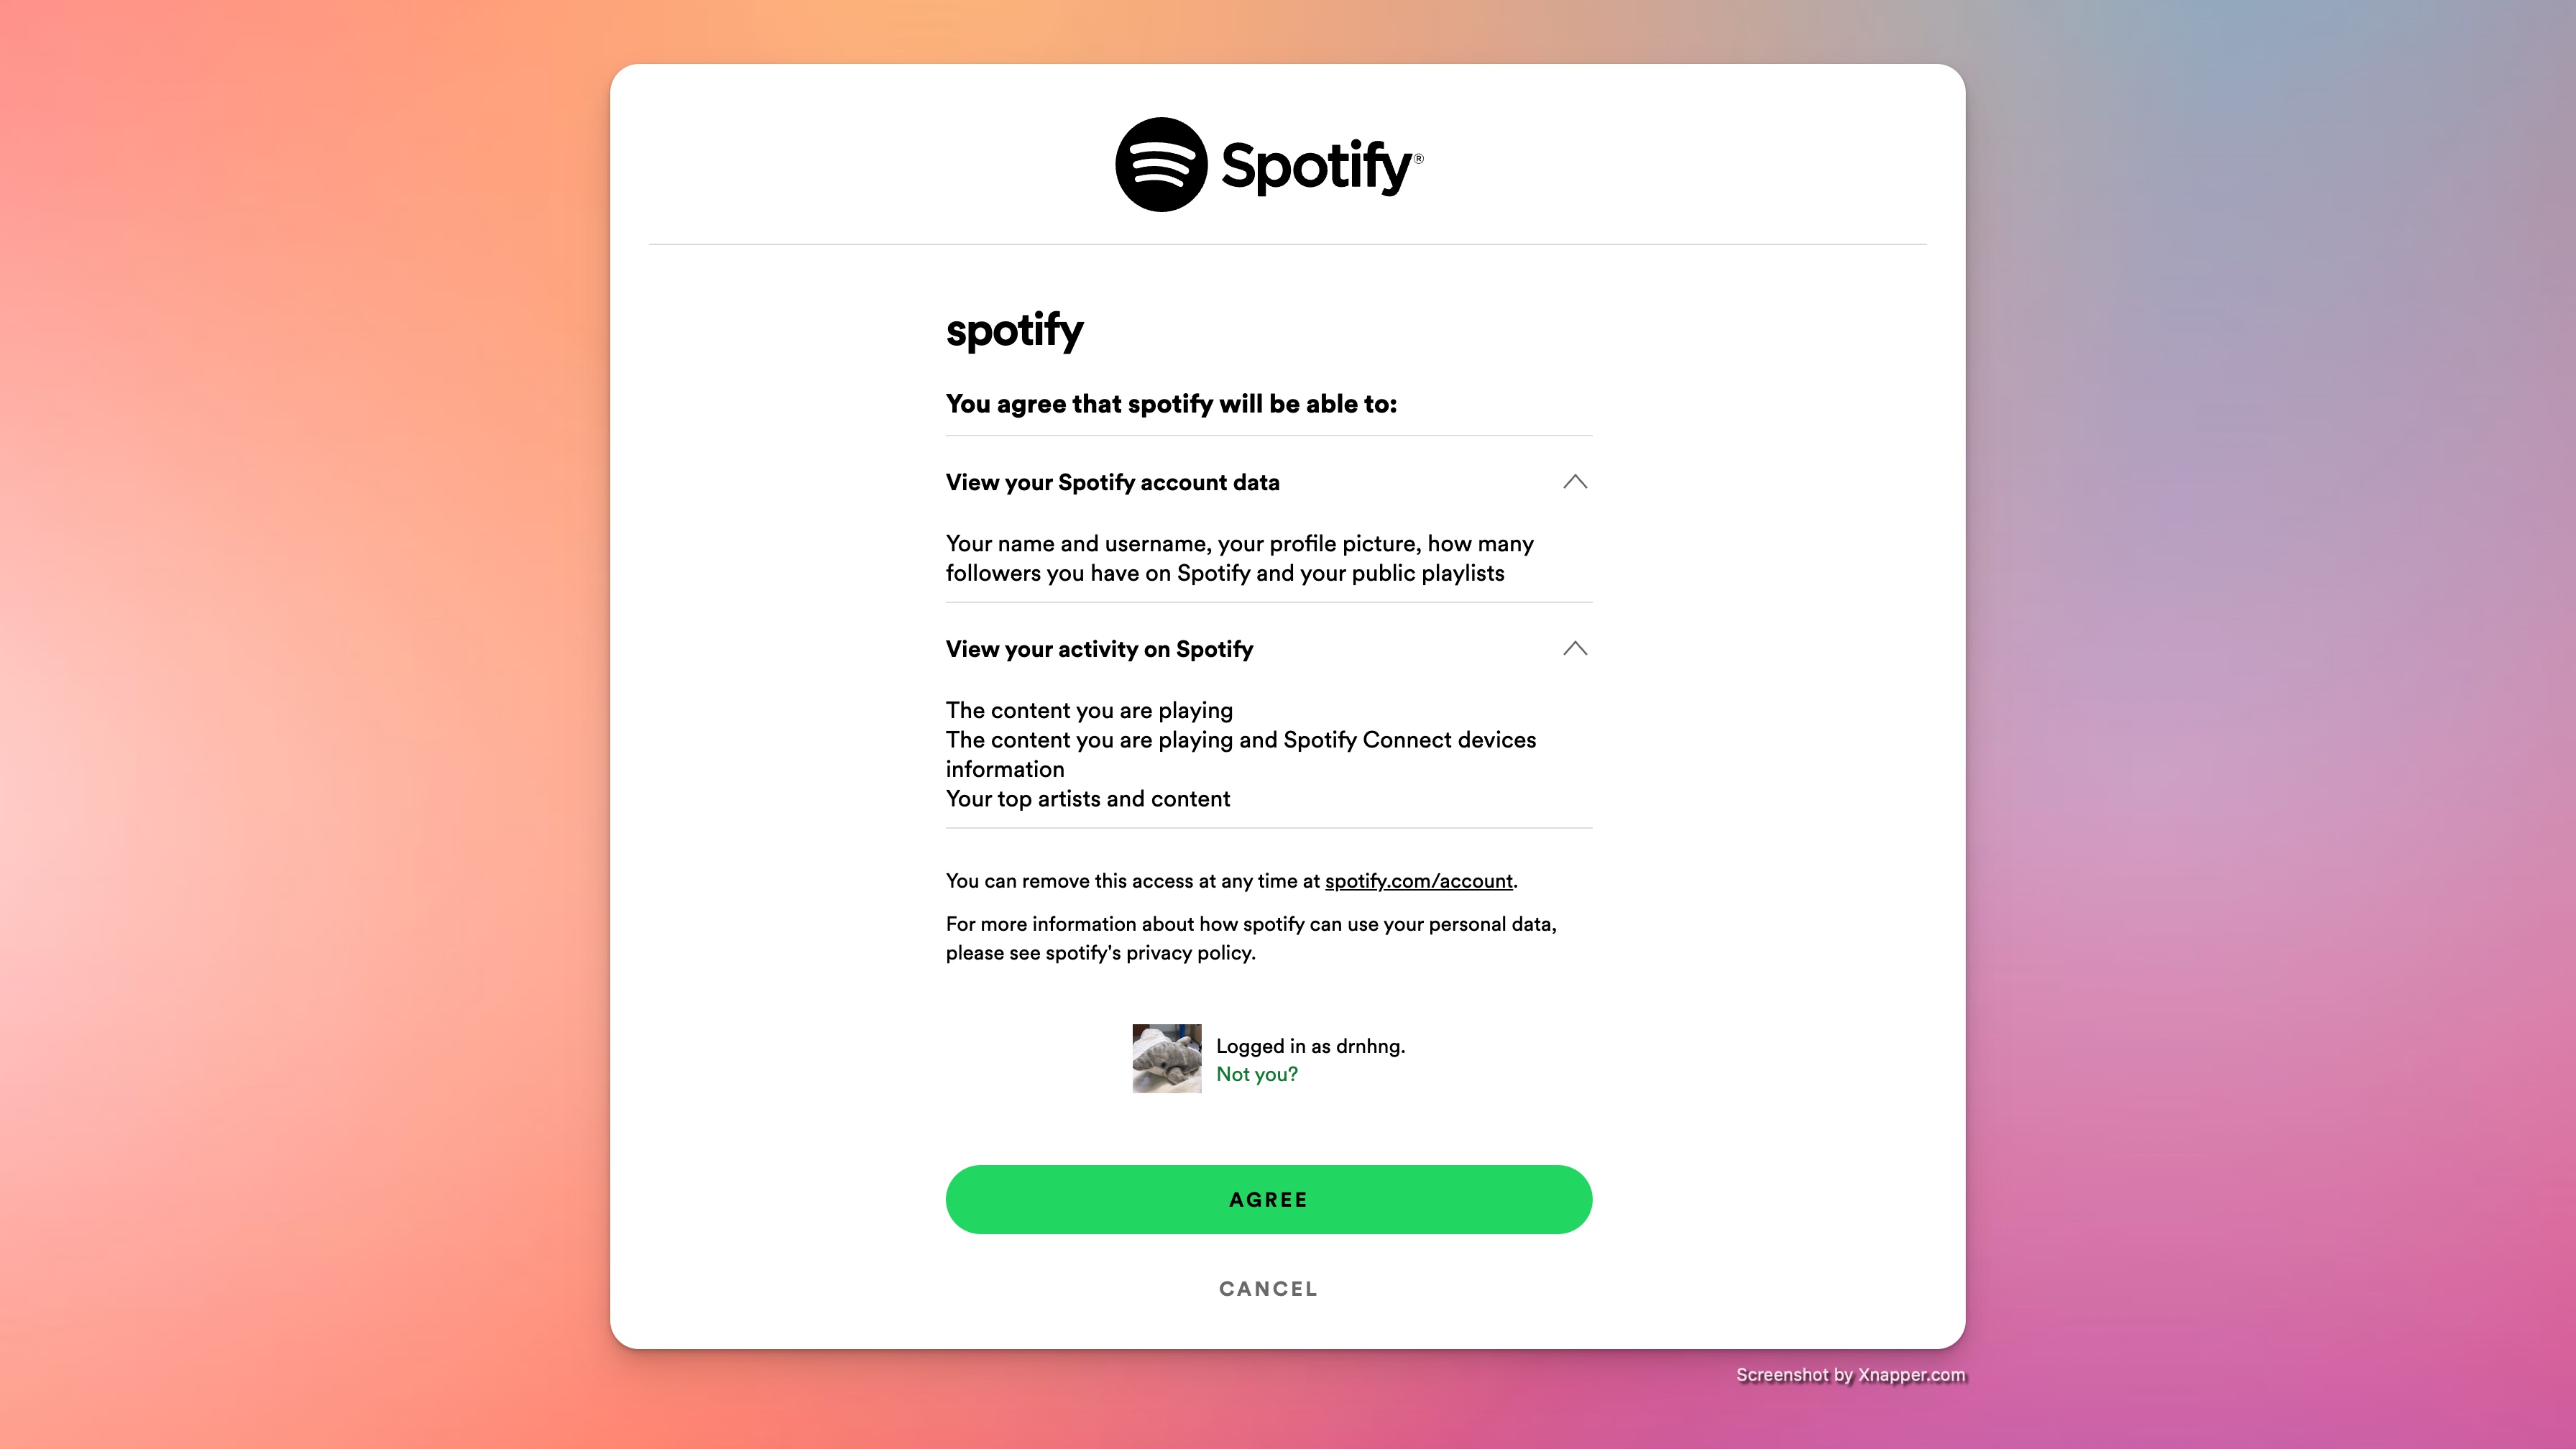 To see your recent listening stats, you need to log in to your Spotify account.